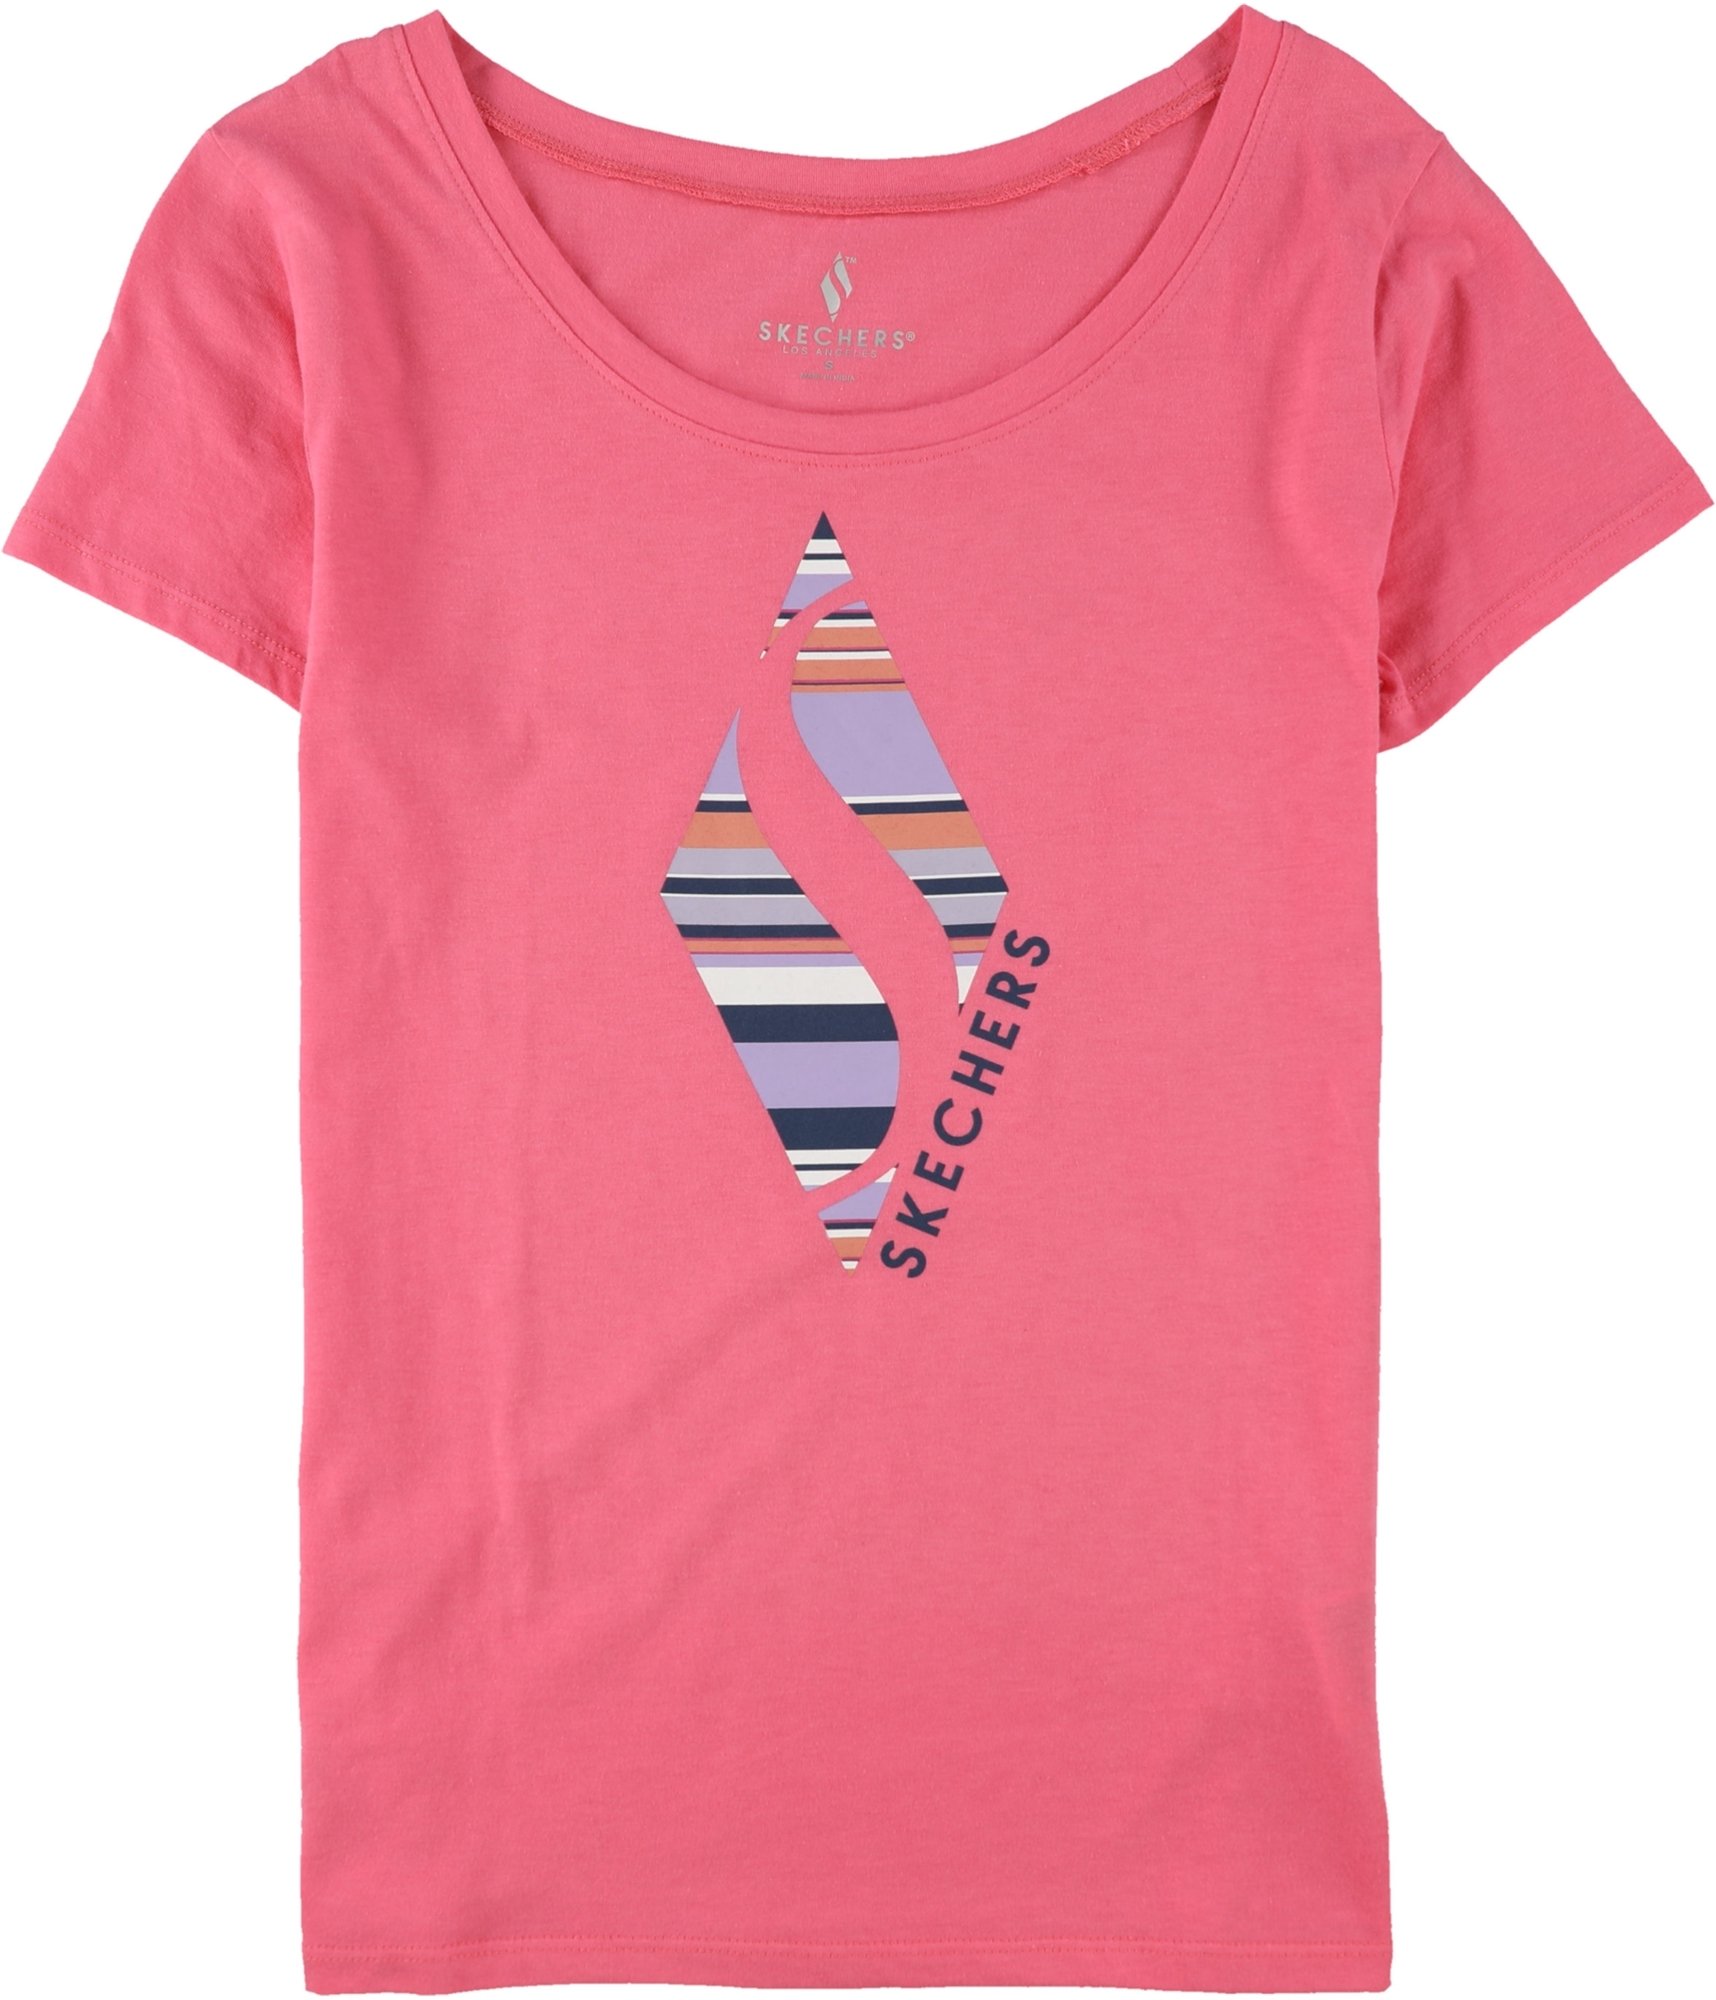 T-Shirt a Graphic Skechers Diamond | Buy Tagsweekly Striped Womens